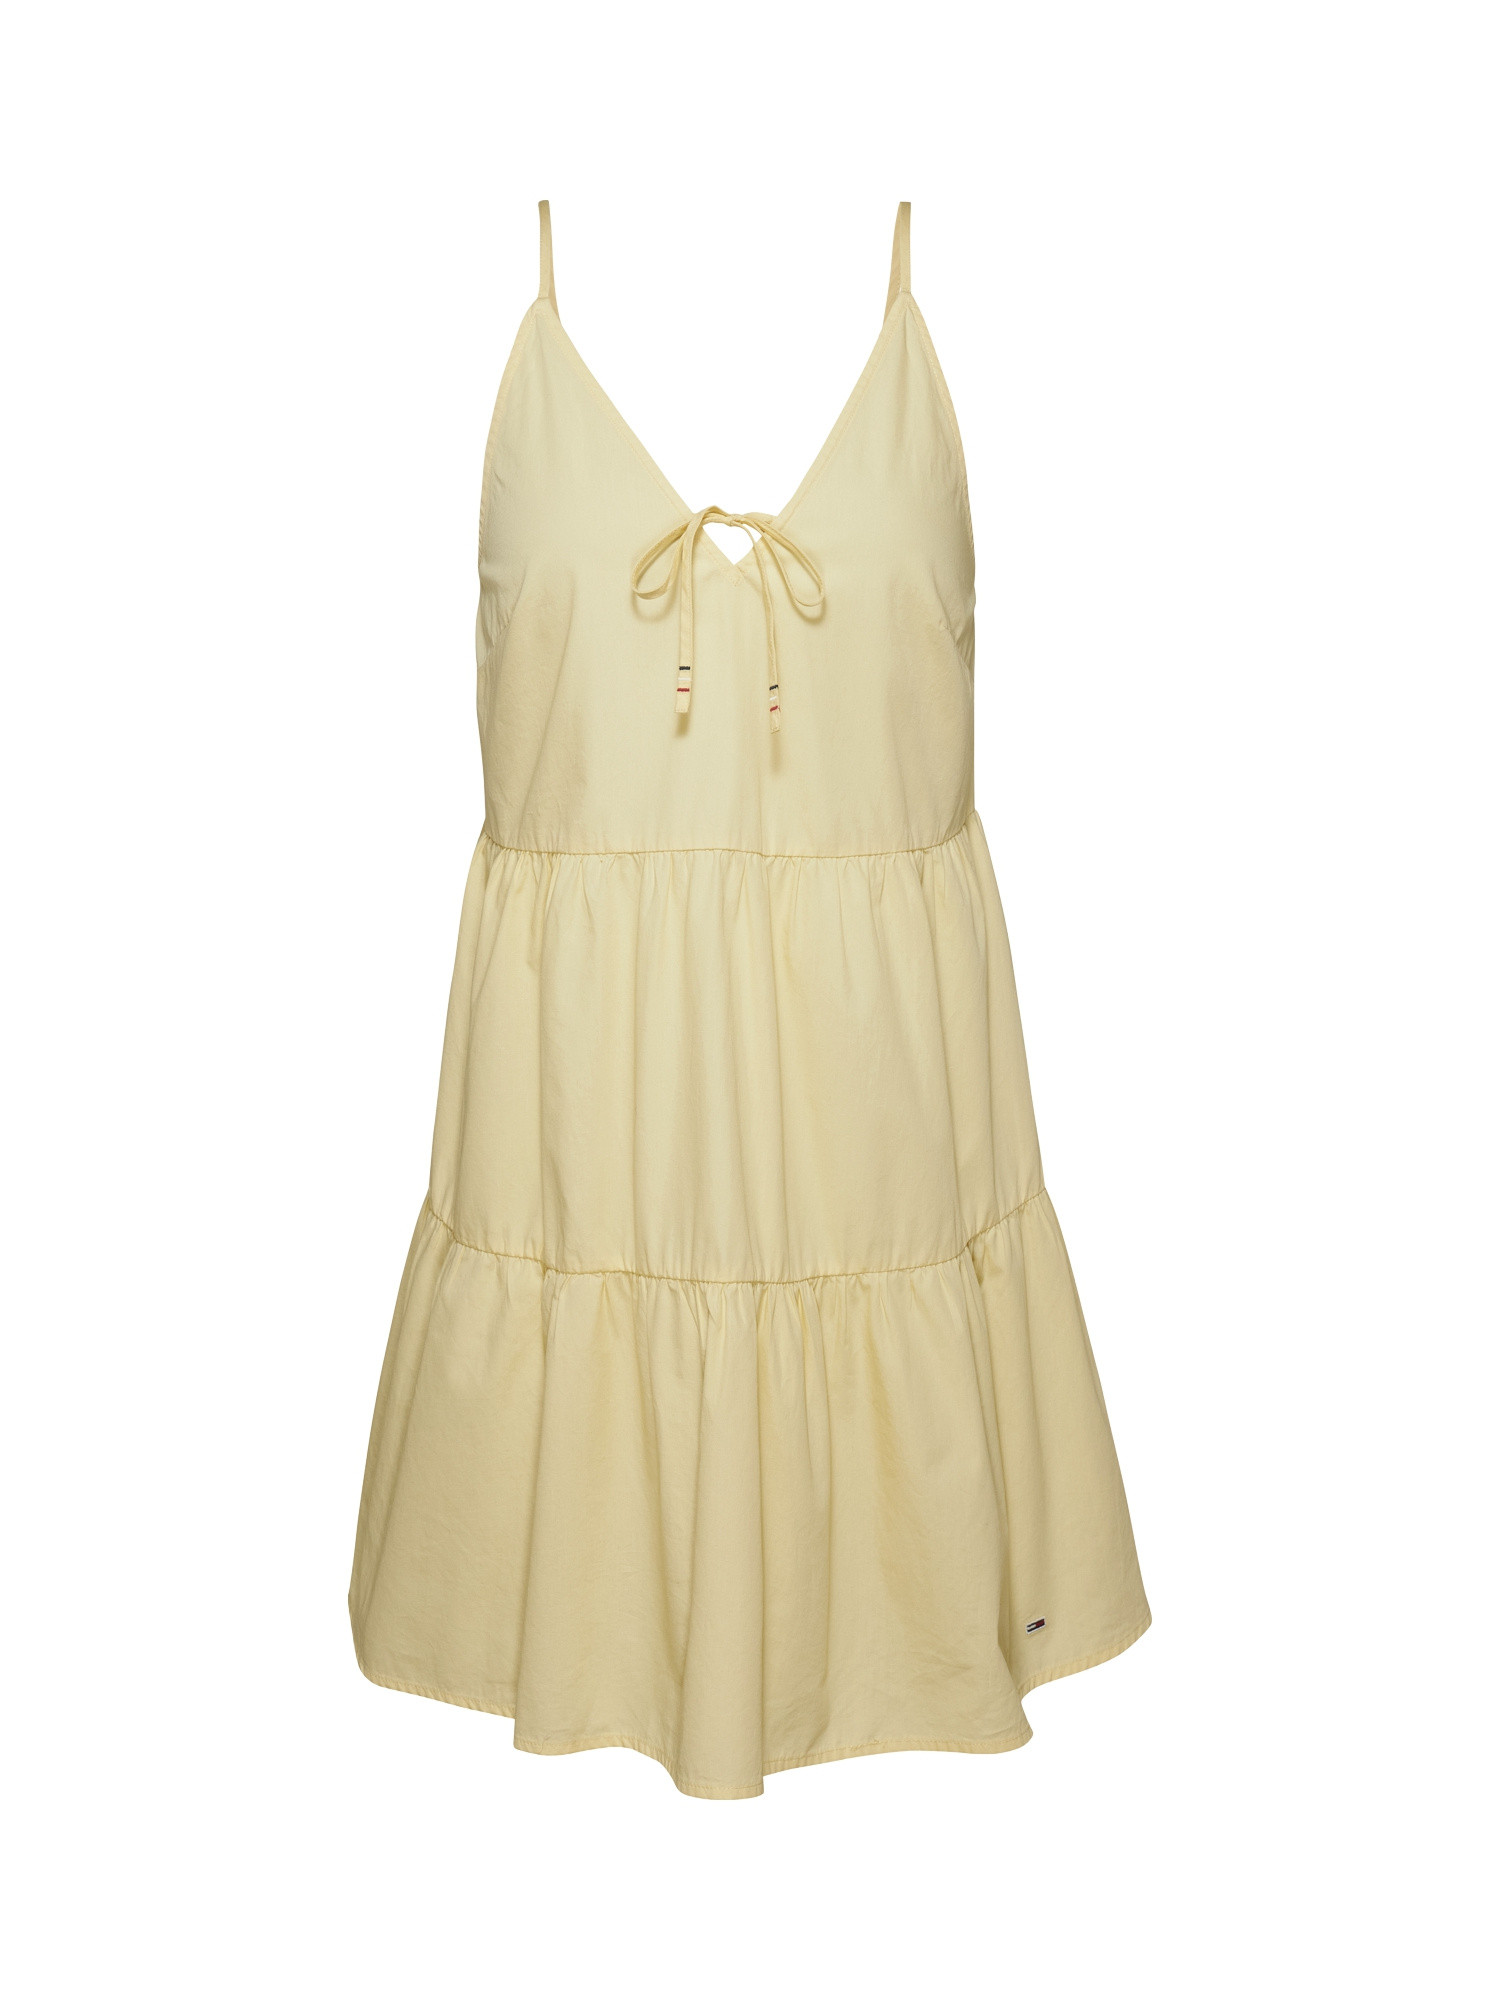 Tommy Jeans - Flounced dress in cotton, Light Yellow, large image number 0